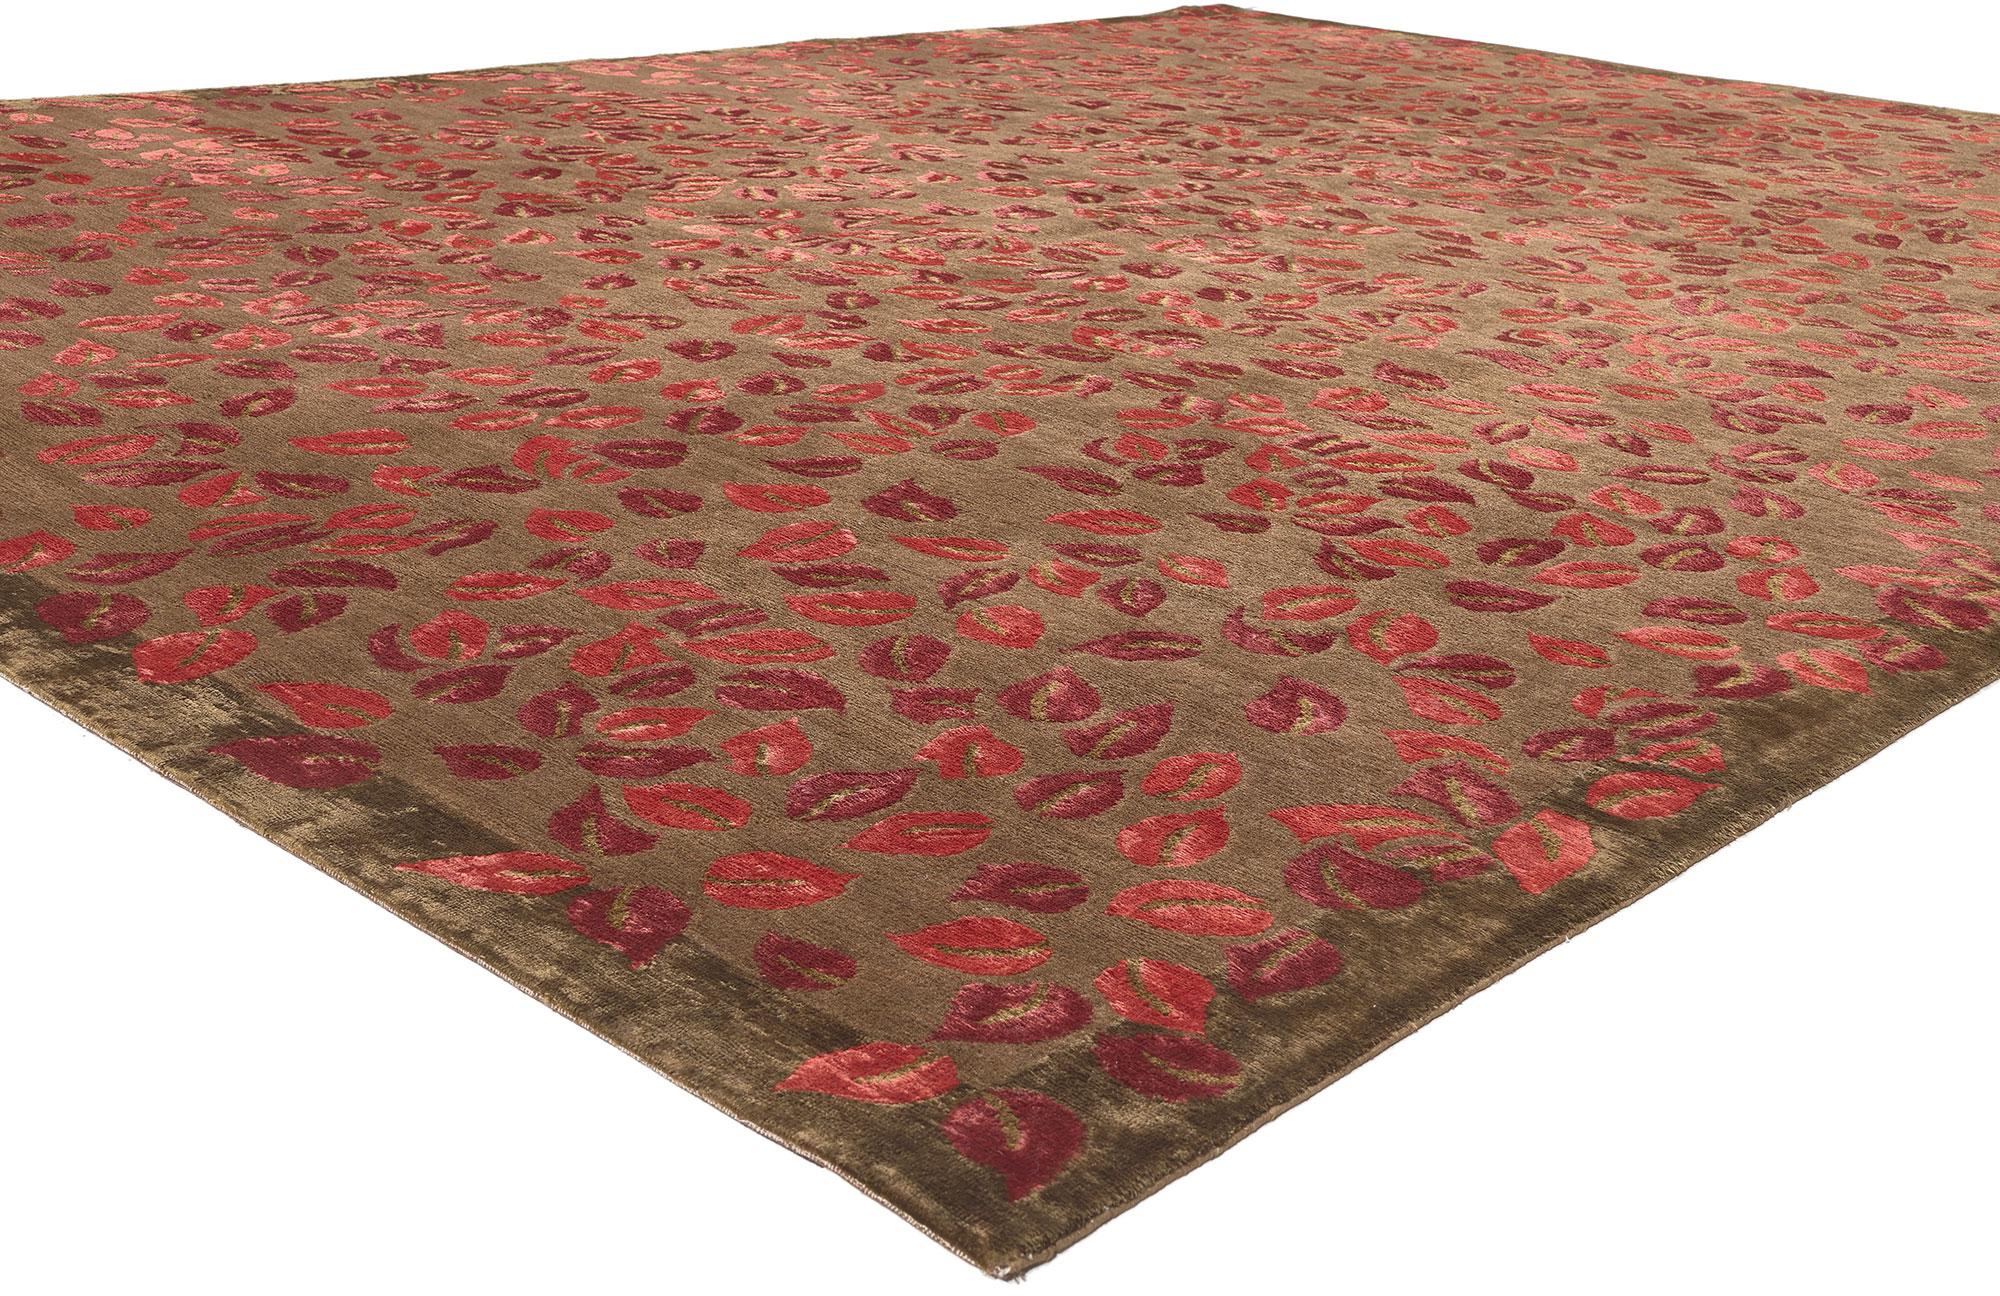 78535 Wool and Silk Modern Tibetan Rug, 09'00 x 11'11.
Biophilic Design meets earth-tone elegance in this modern wool and silk Tibetan rug. The nature-inspired design and earthy colorway woven into this piece work together creating a warm and